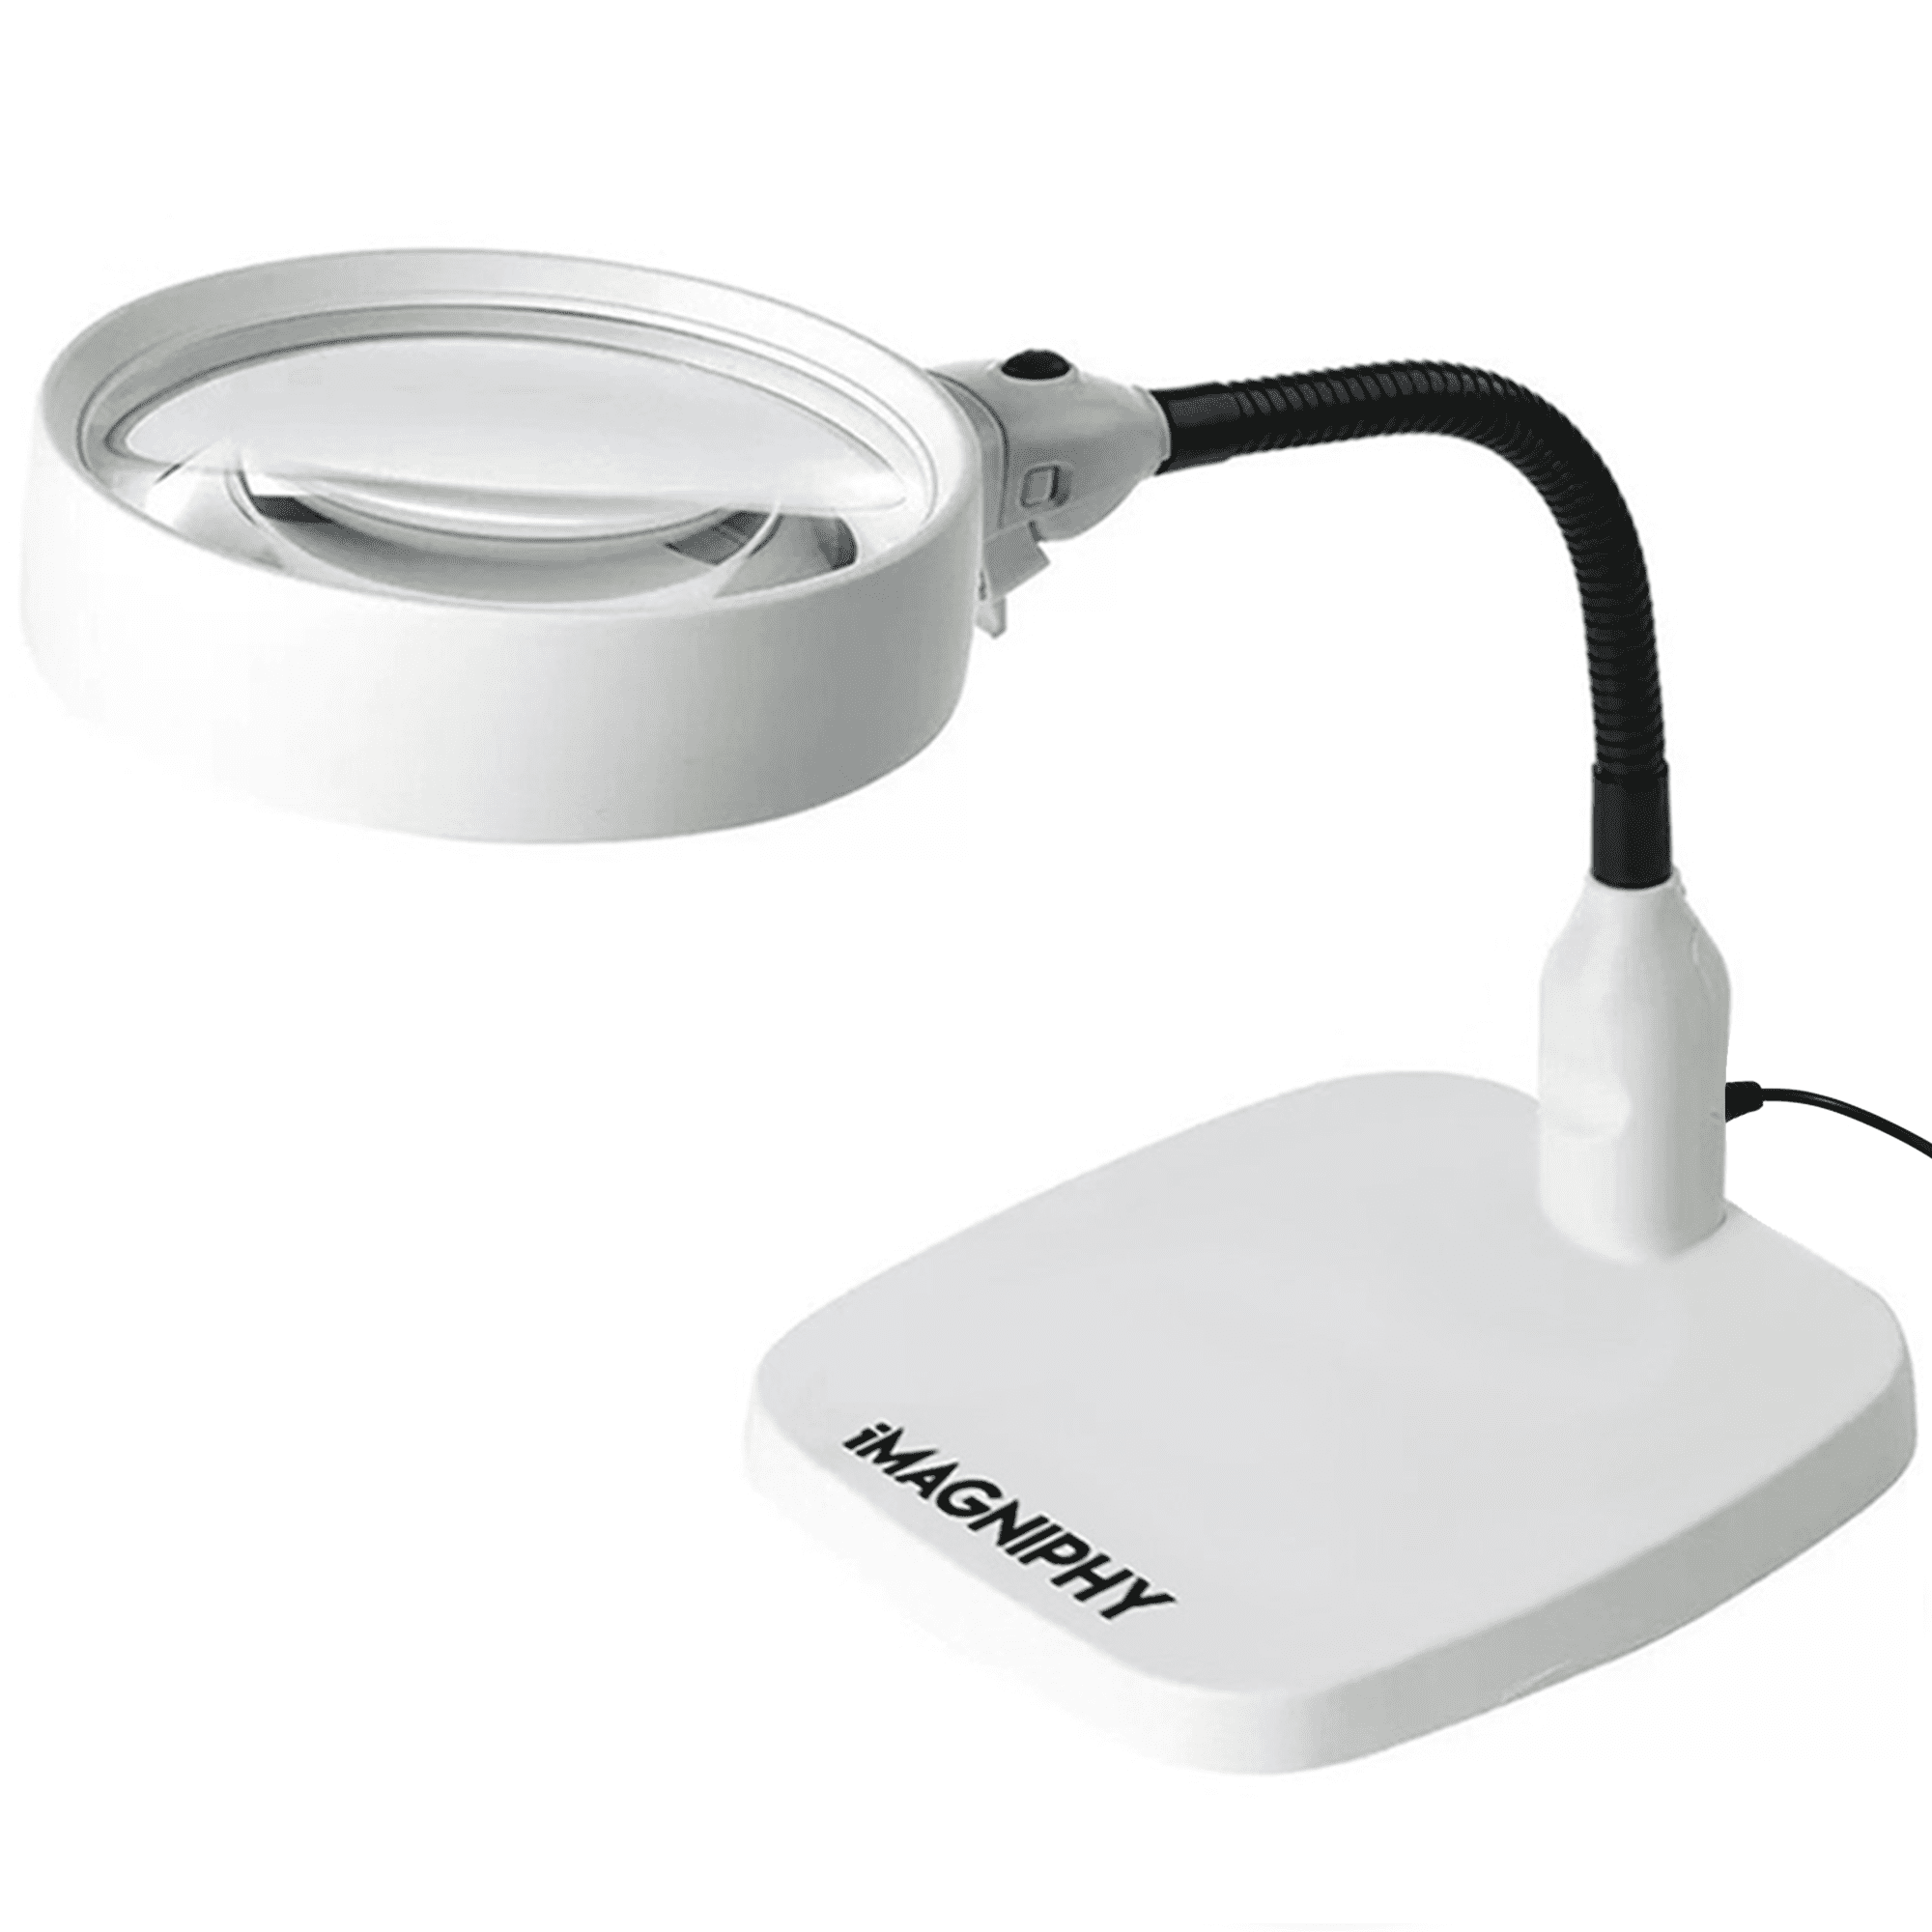 Imagniphy 8x Desktop Magnifier With, Desktop Led Lamp With Magnifier